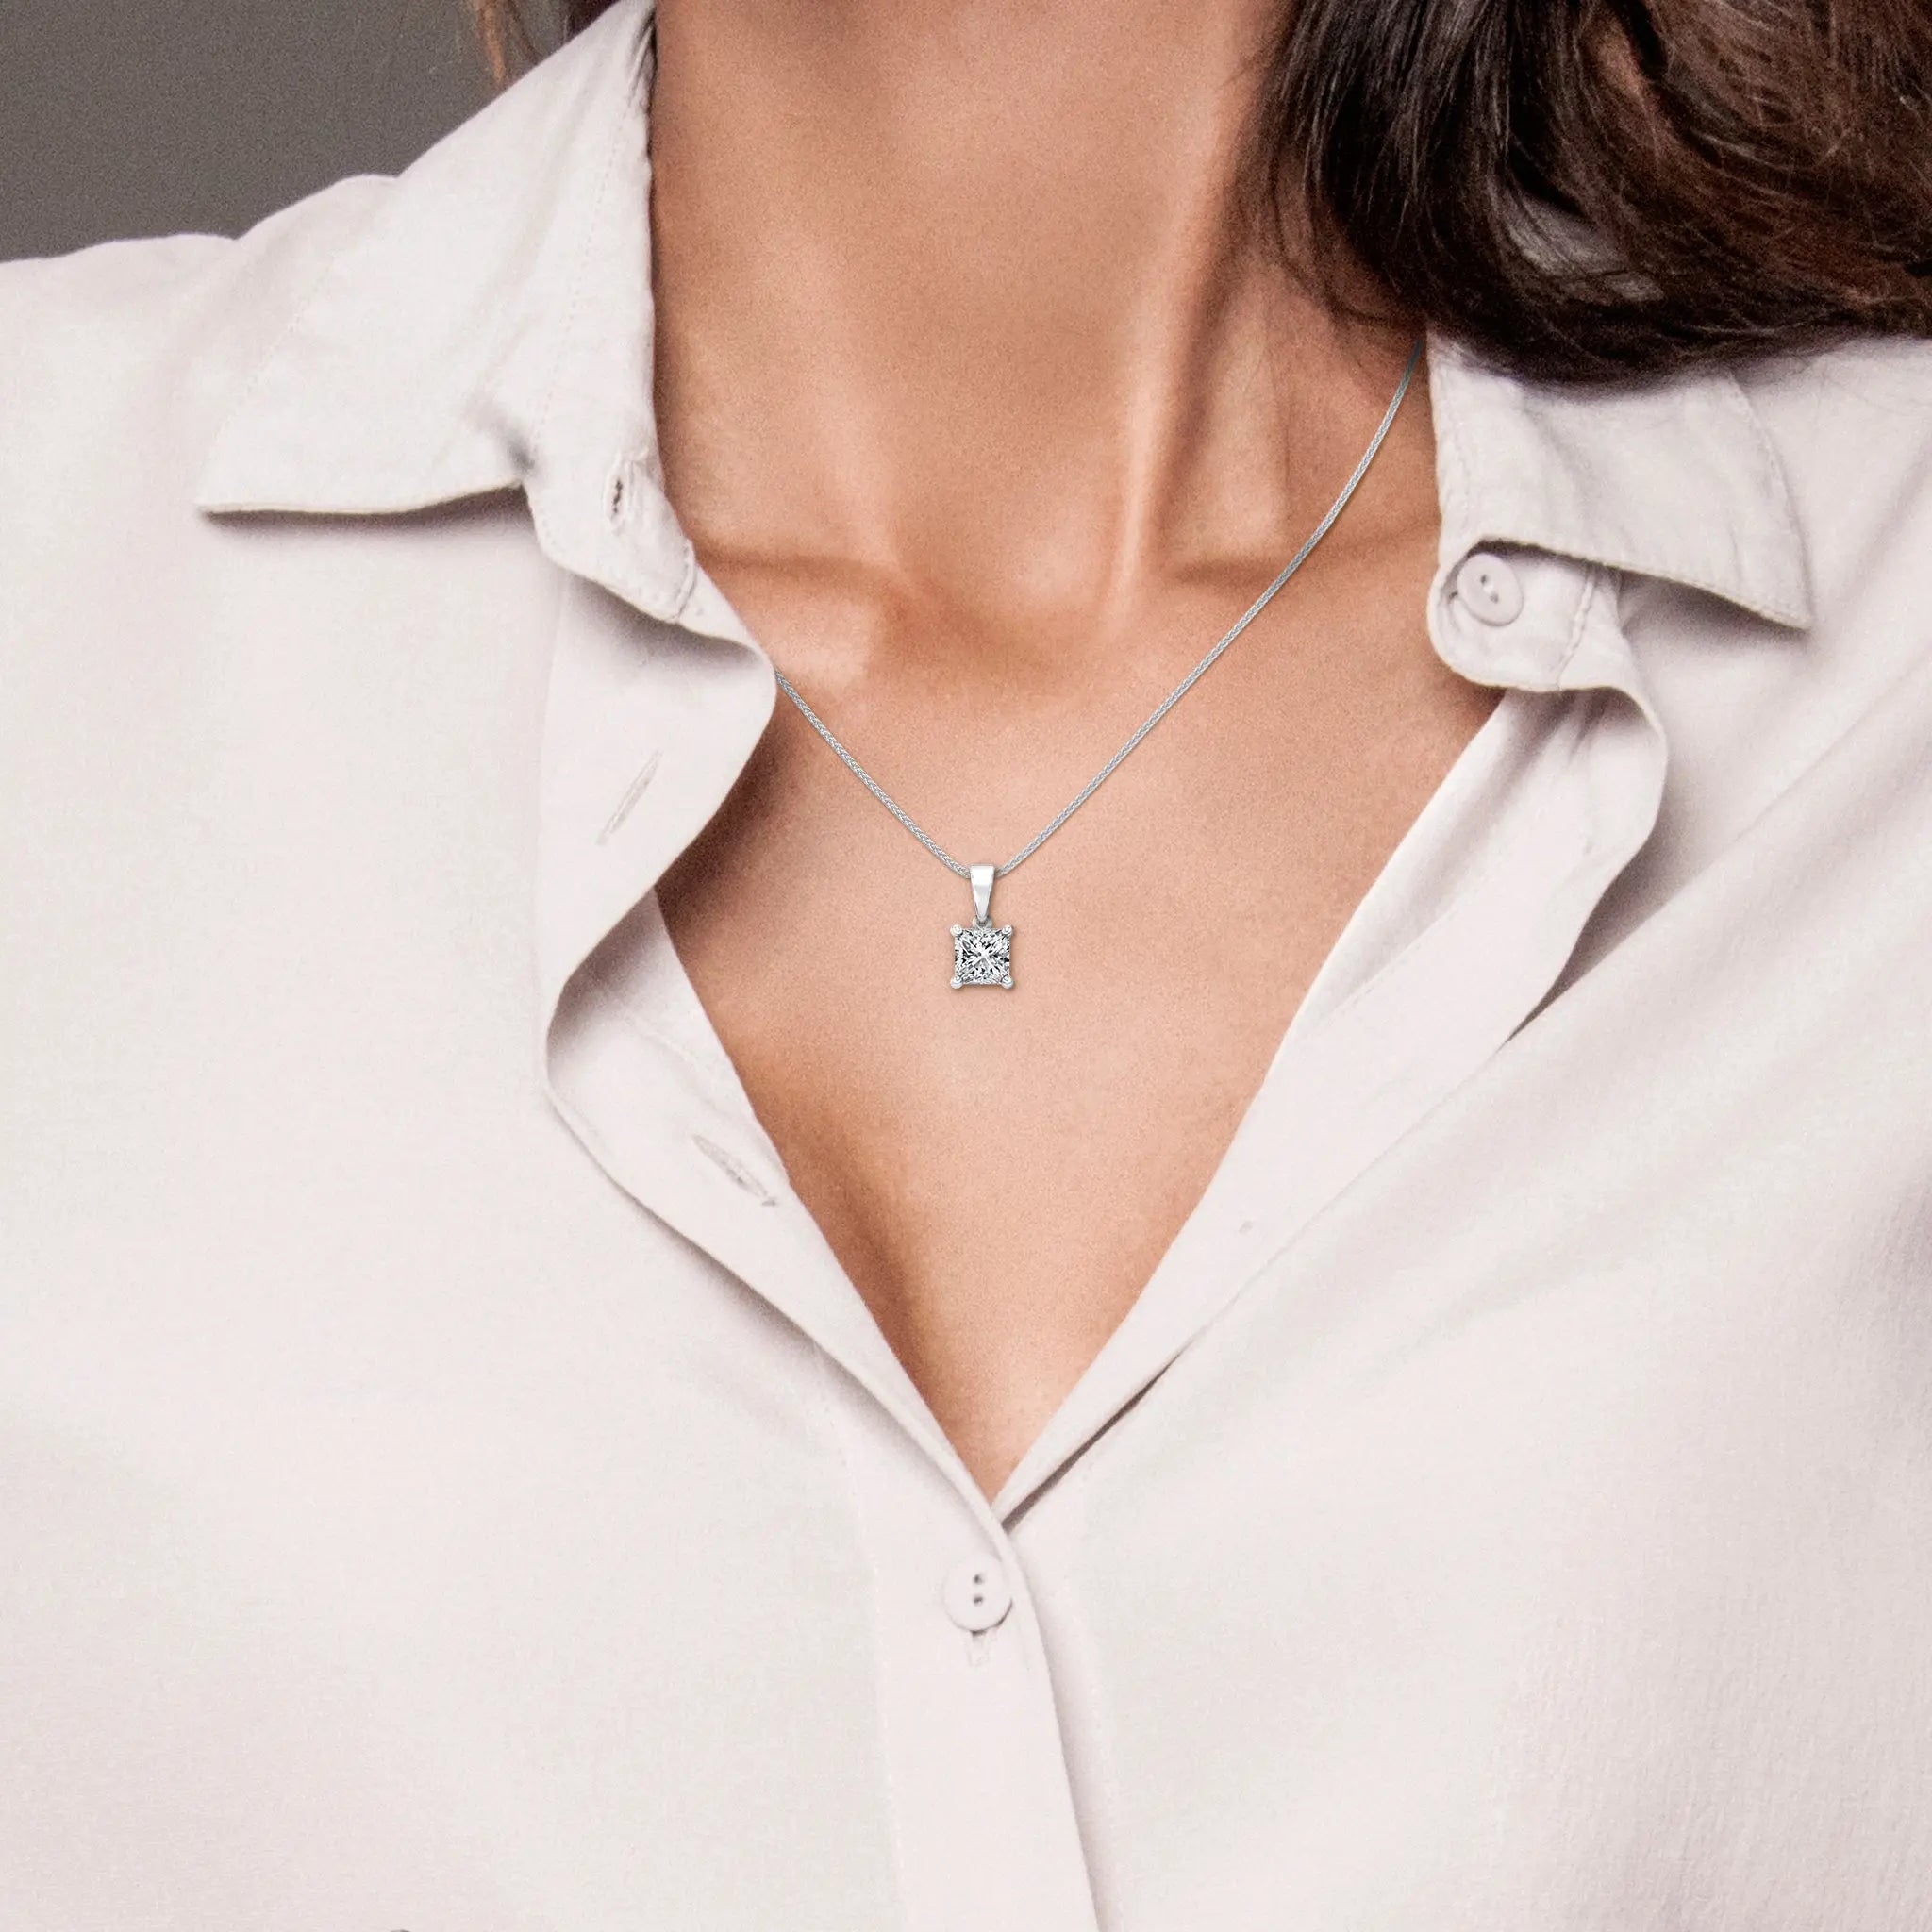 Shimansky - Women Wearing the My Girl Solitaire Diamond Pendant 1.00ct Crafted in 18K White Gold